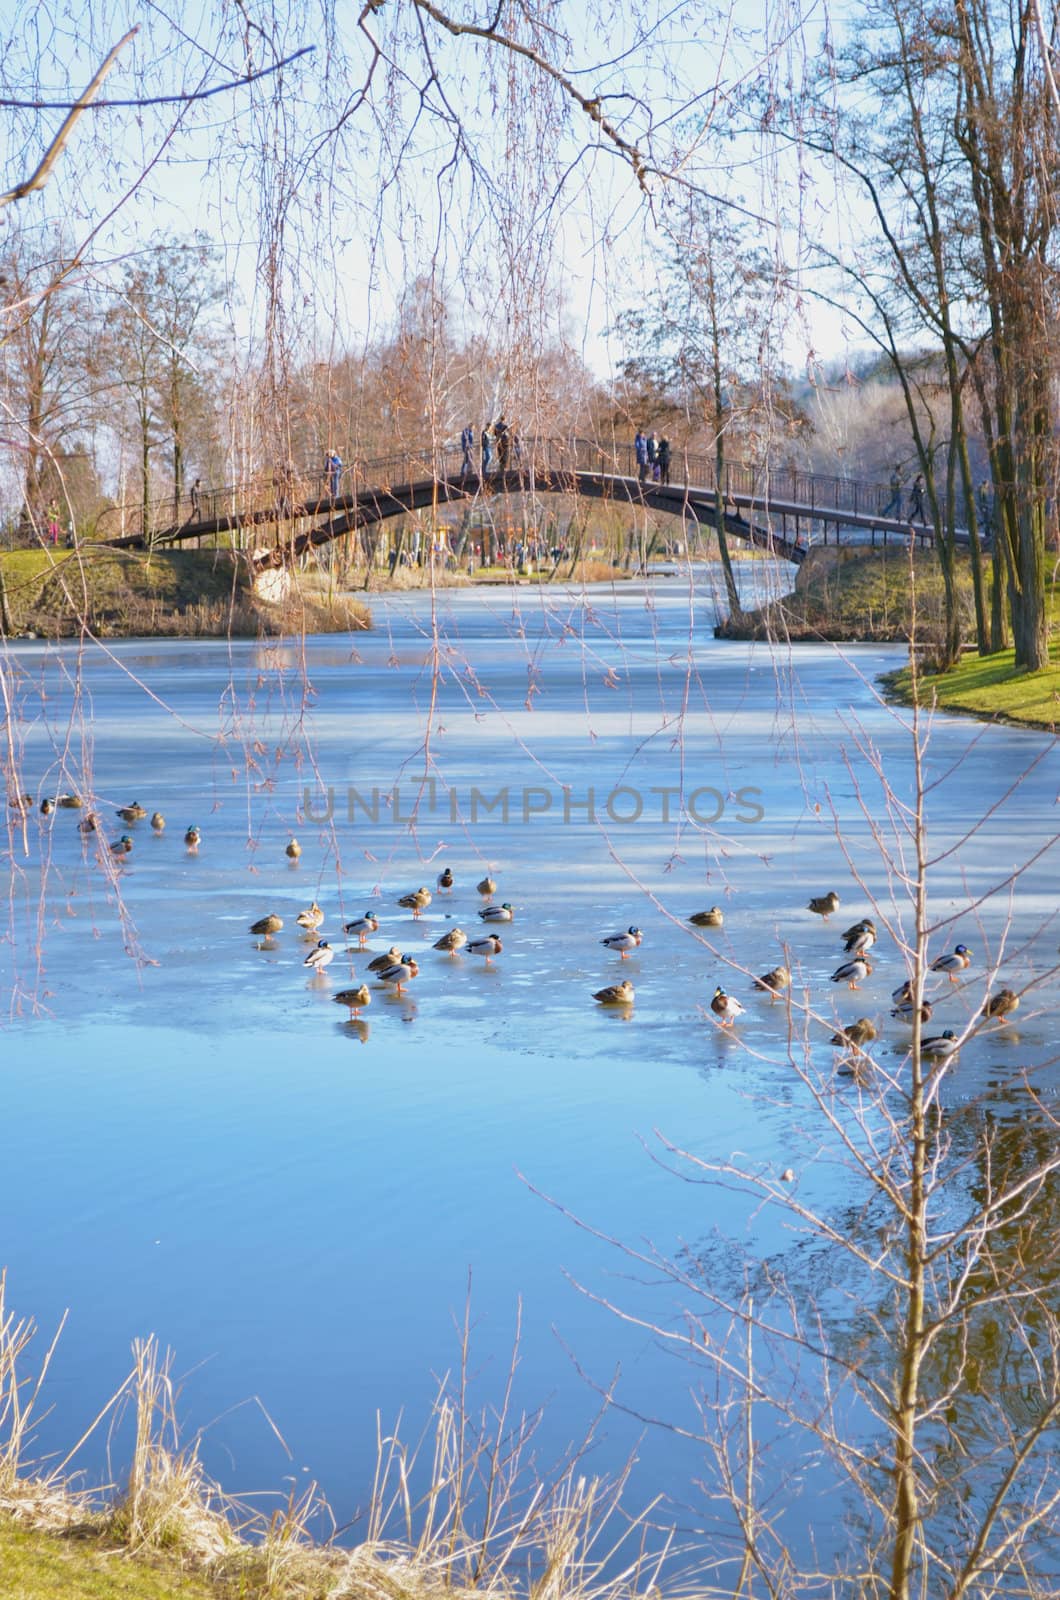 Ducks in the lake and brige by puppiesam